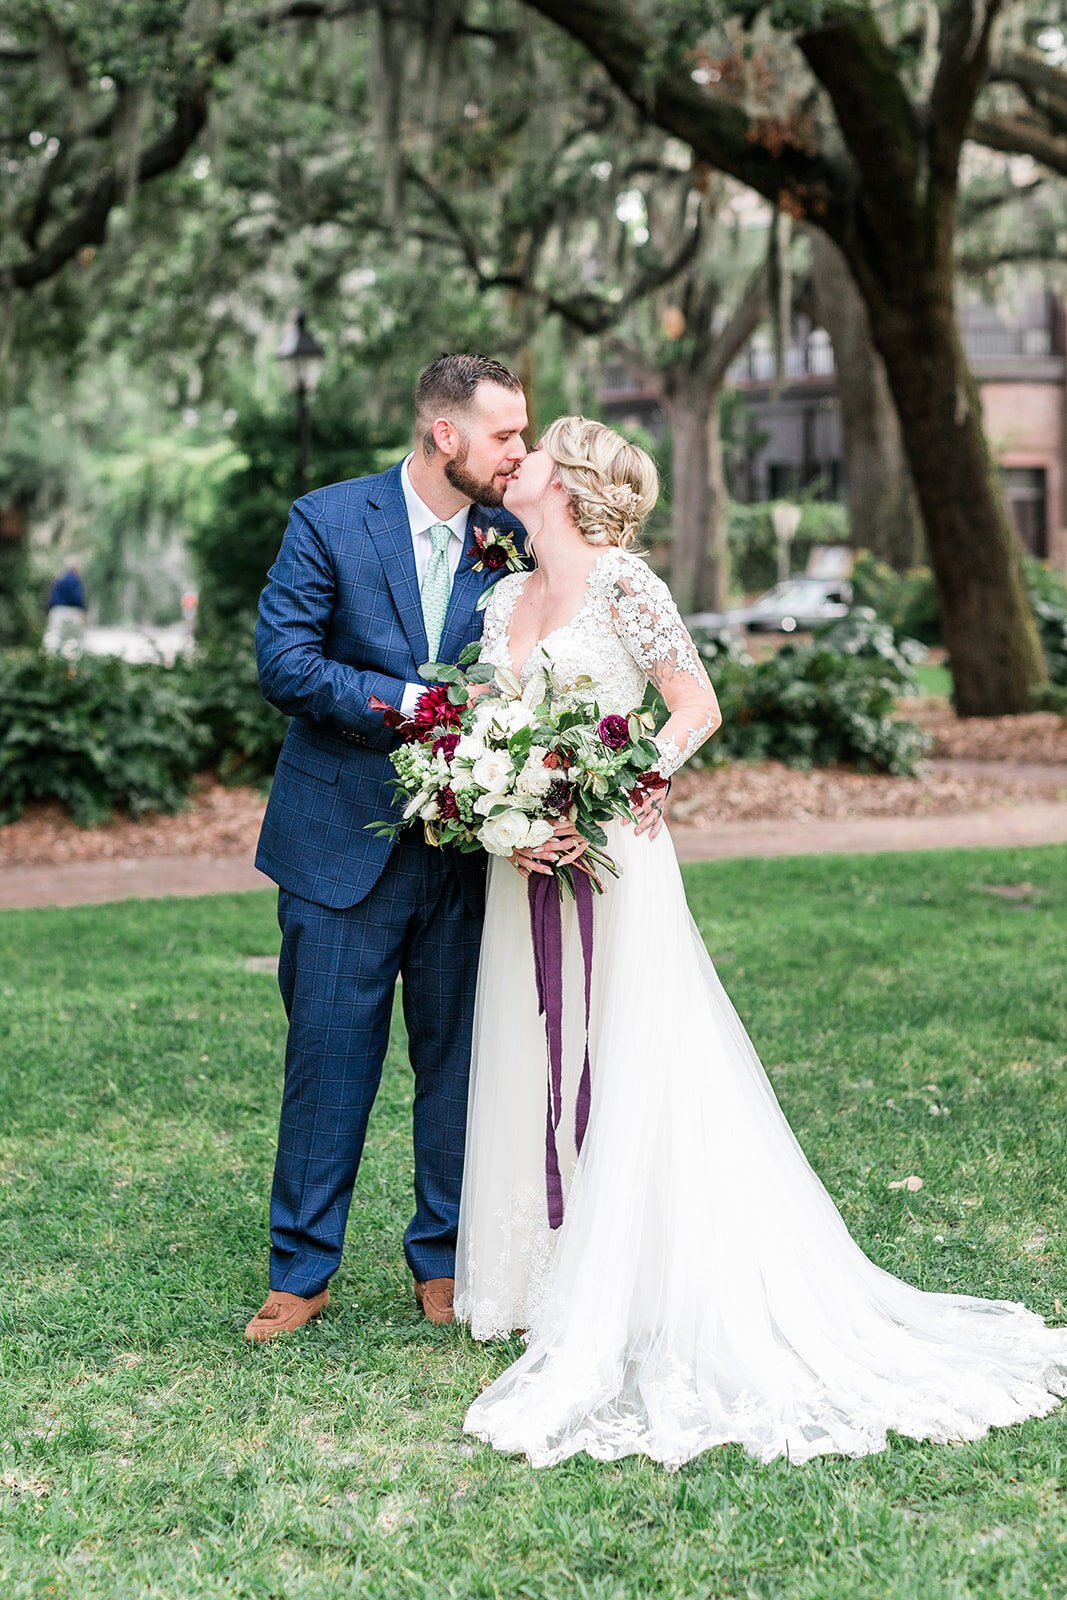 ivory-and-beau-florals-spring-and-stephen-wedding-flowers-wedding-florals-wedding-florist-savannah-florist-savannah-wedding-southern-wedding-floral-design-real-wedding-RLP-B&G1.jpg